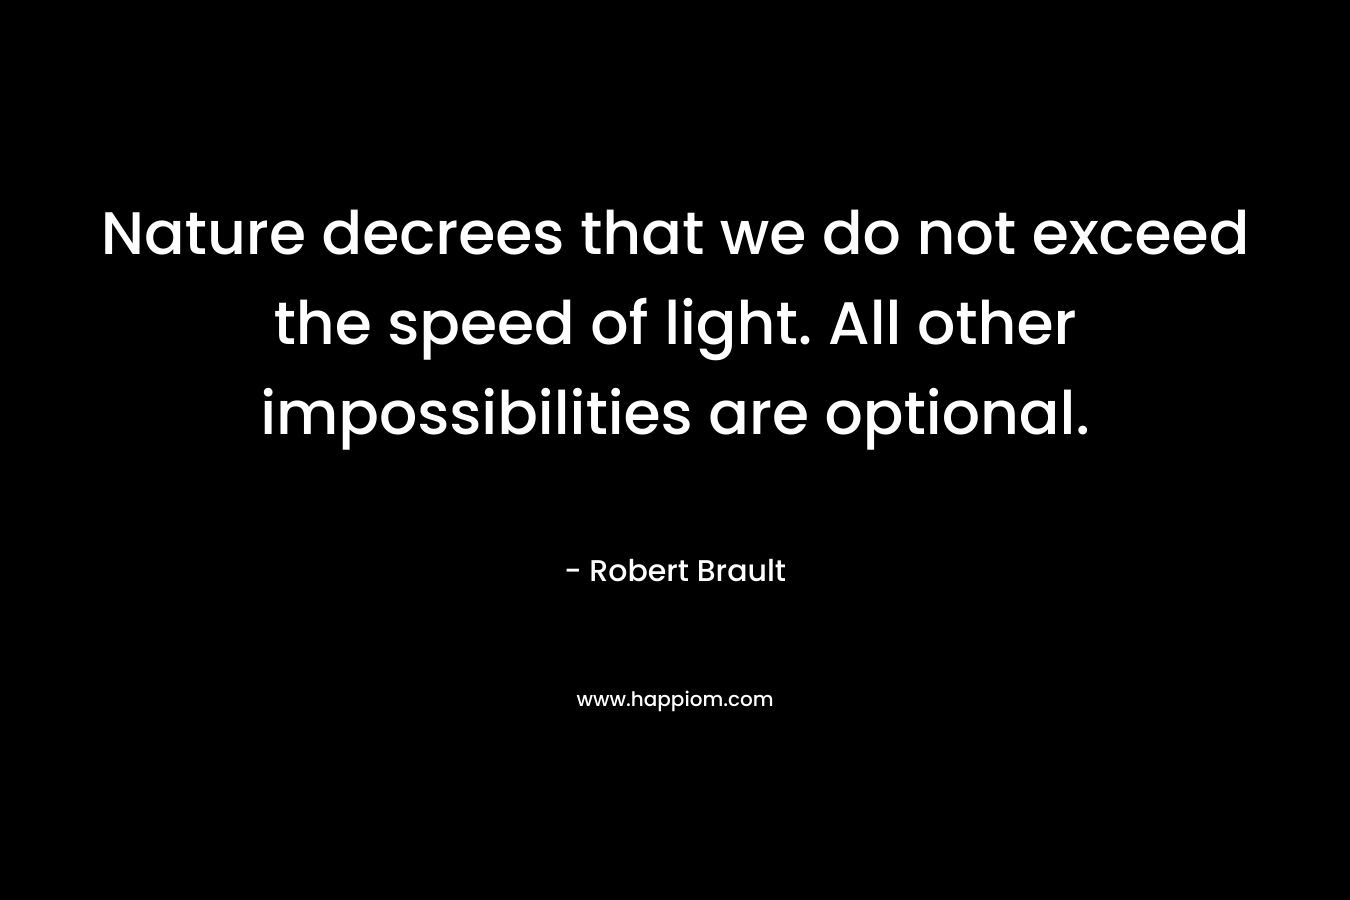 Nature decrees that we do not exceed the speed of light. All other impossibilities are optional.